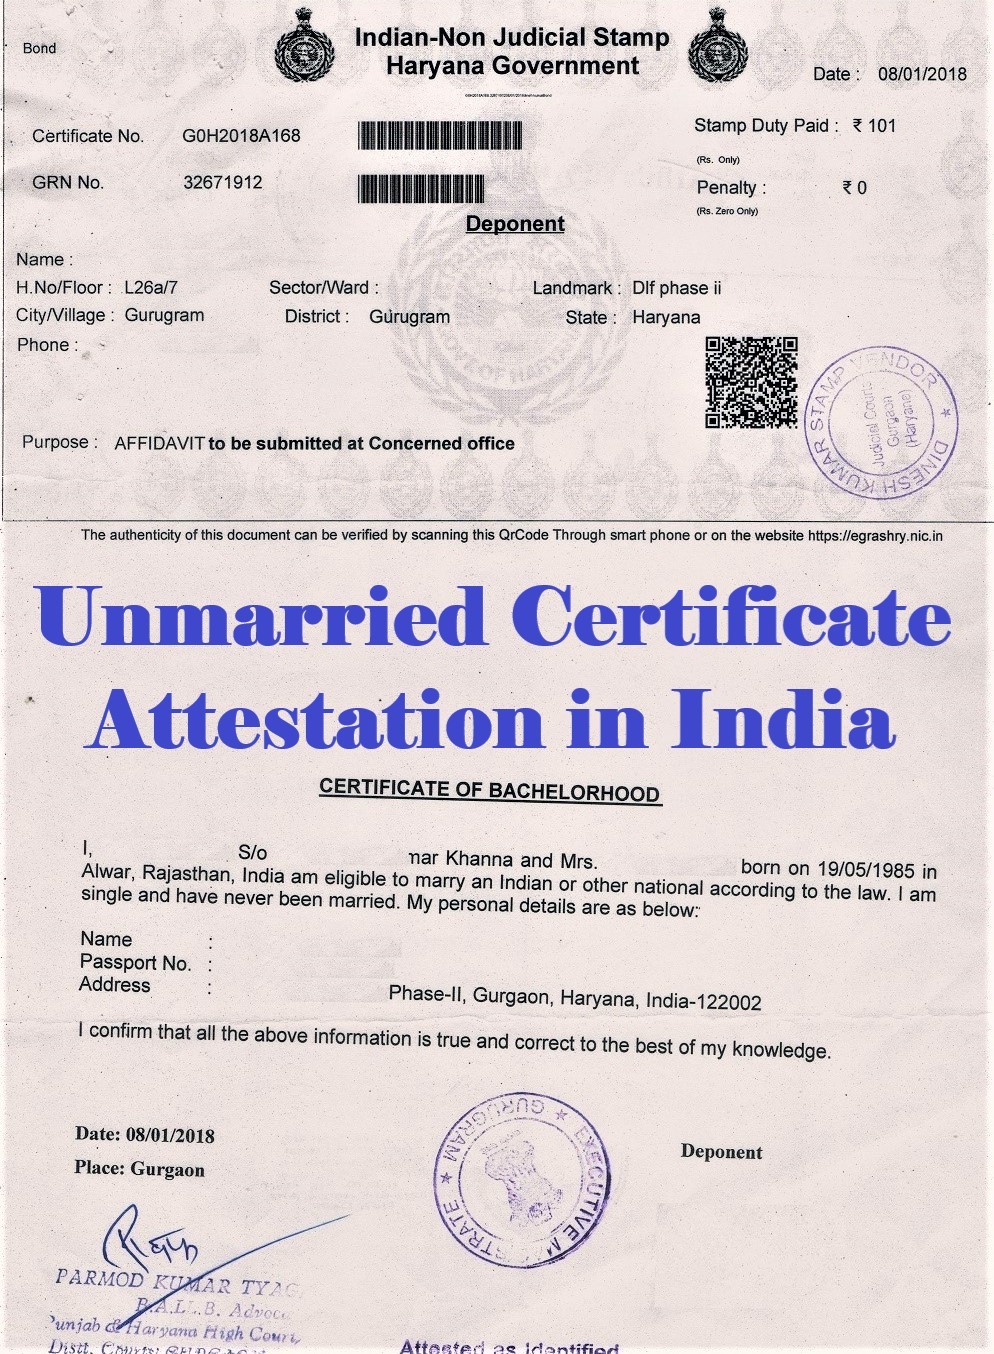 Unmarried Certificate Attestation from Namibia Embassy